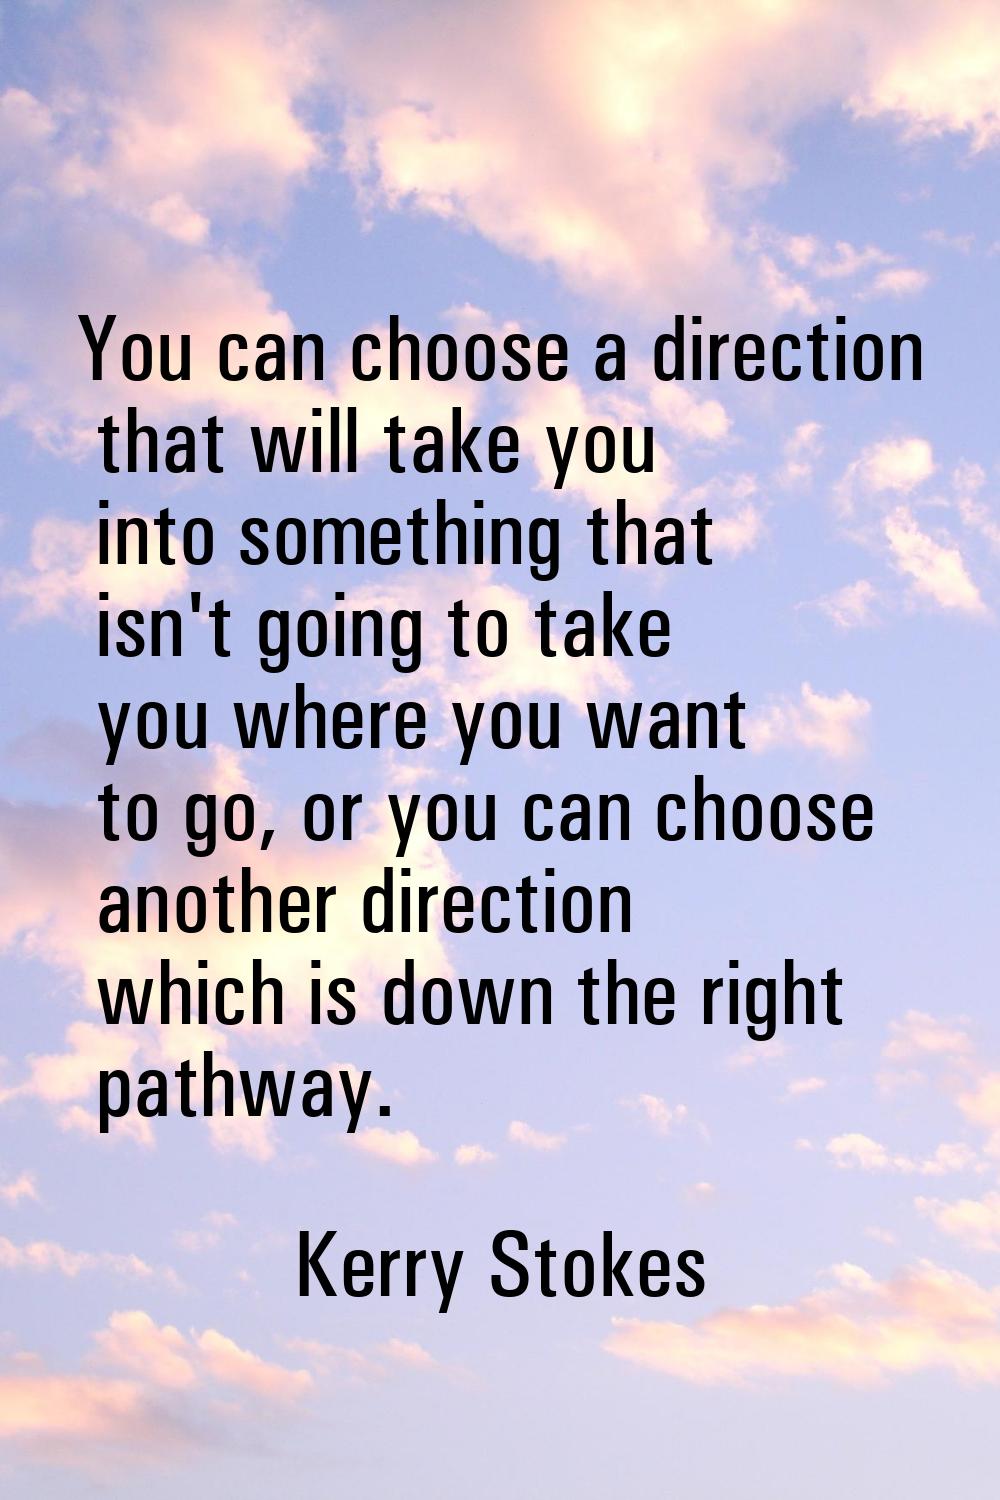 You can choose a direction that will take you into something that isn't going to take you where you